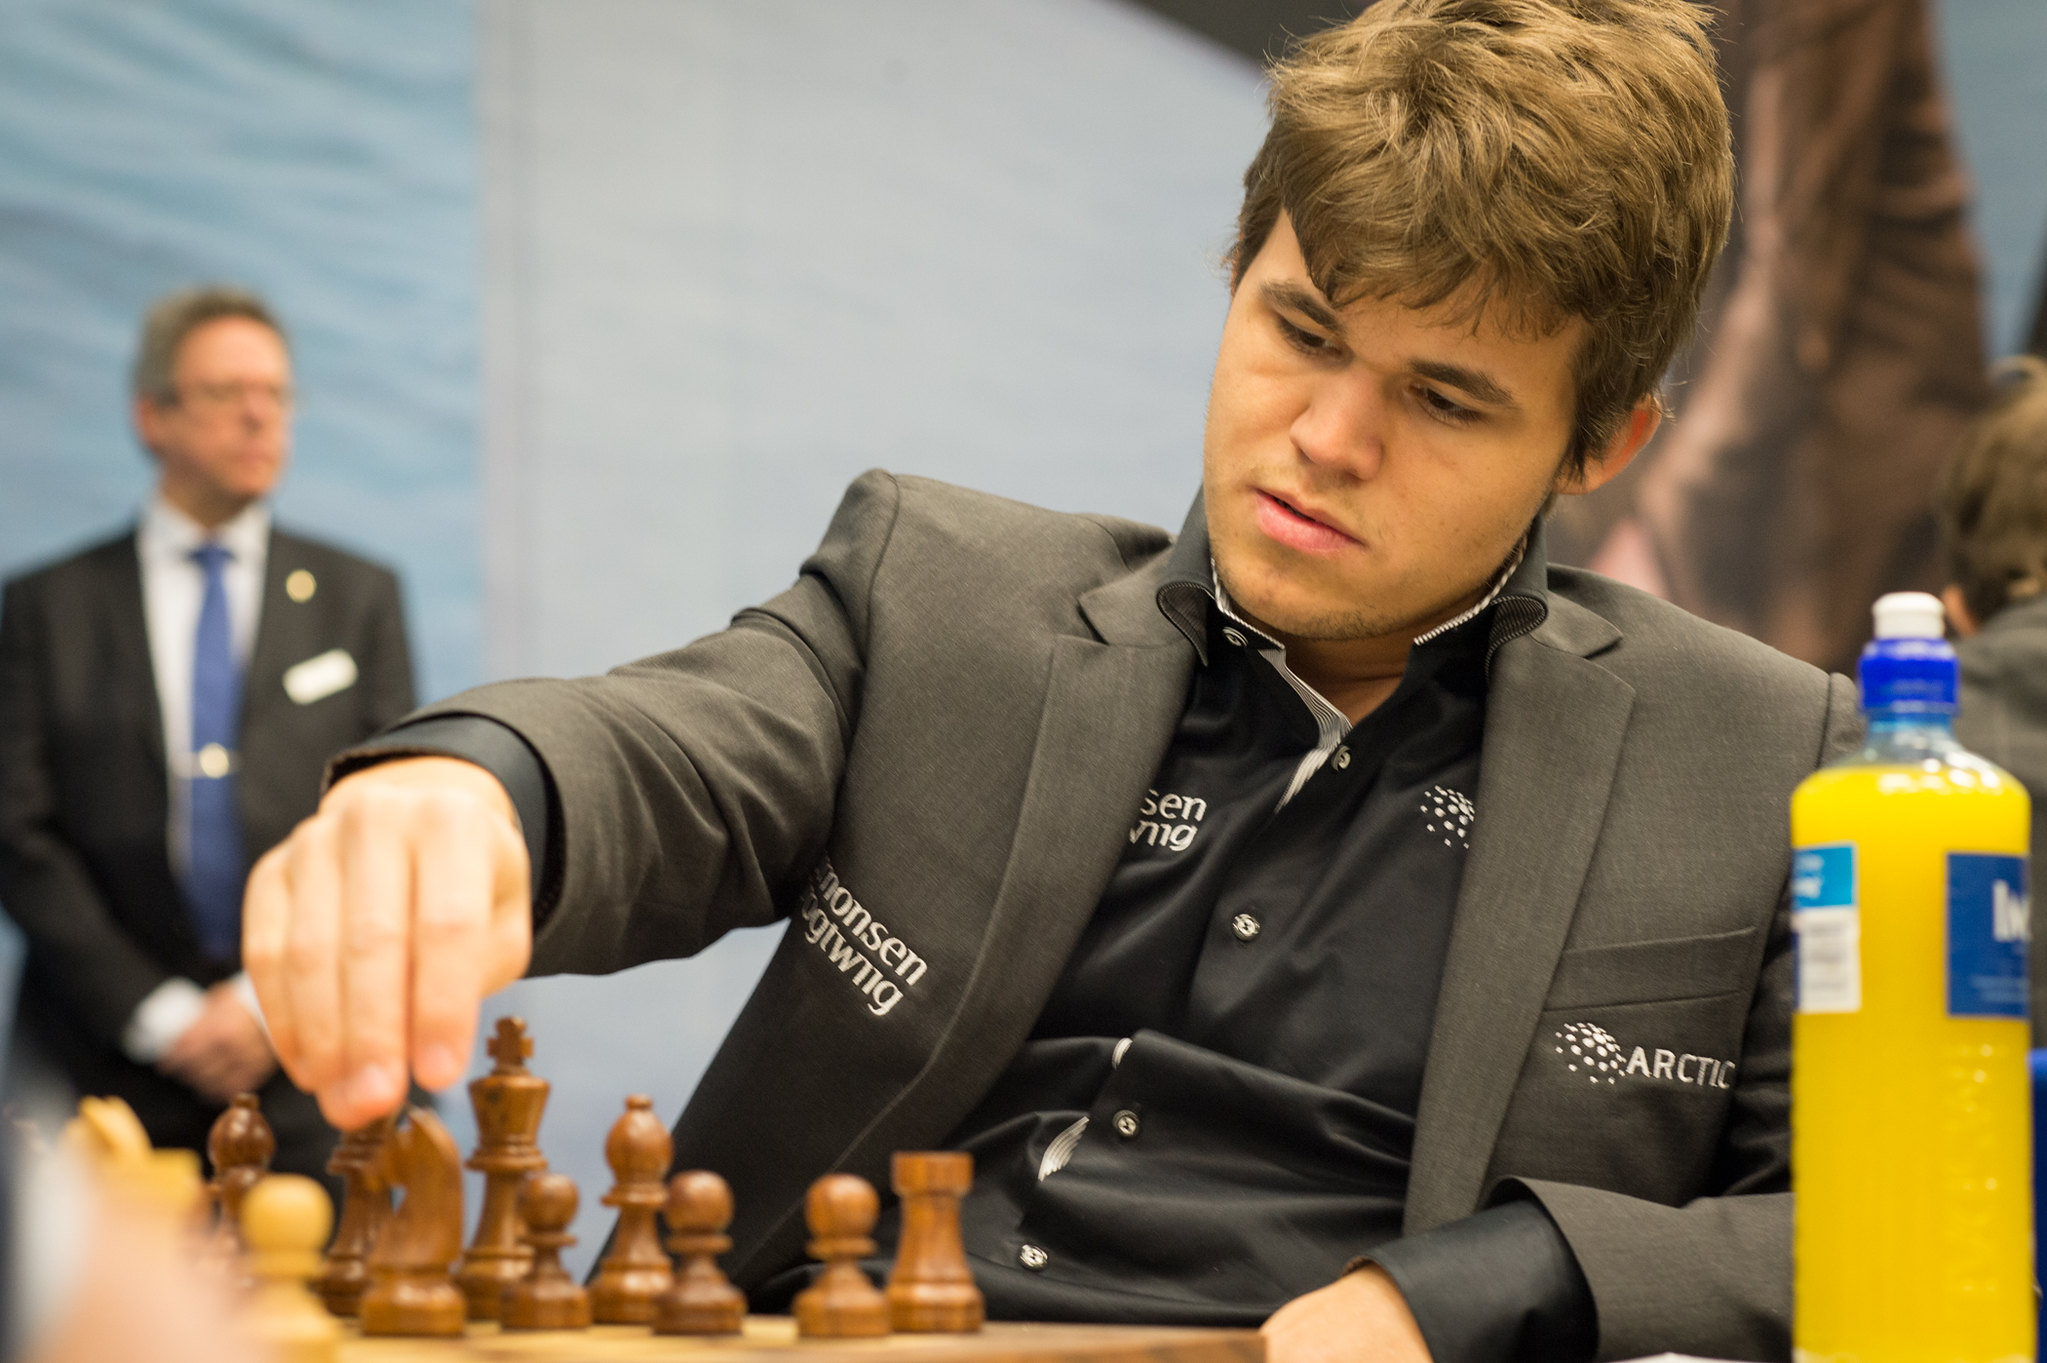 World No. 1 chess player says he played "mediocre at best" Dot Esports